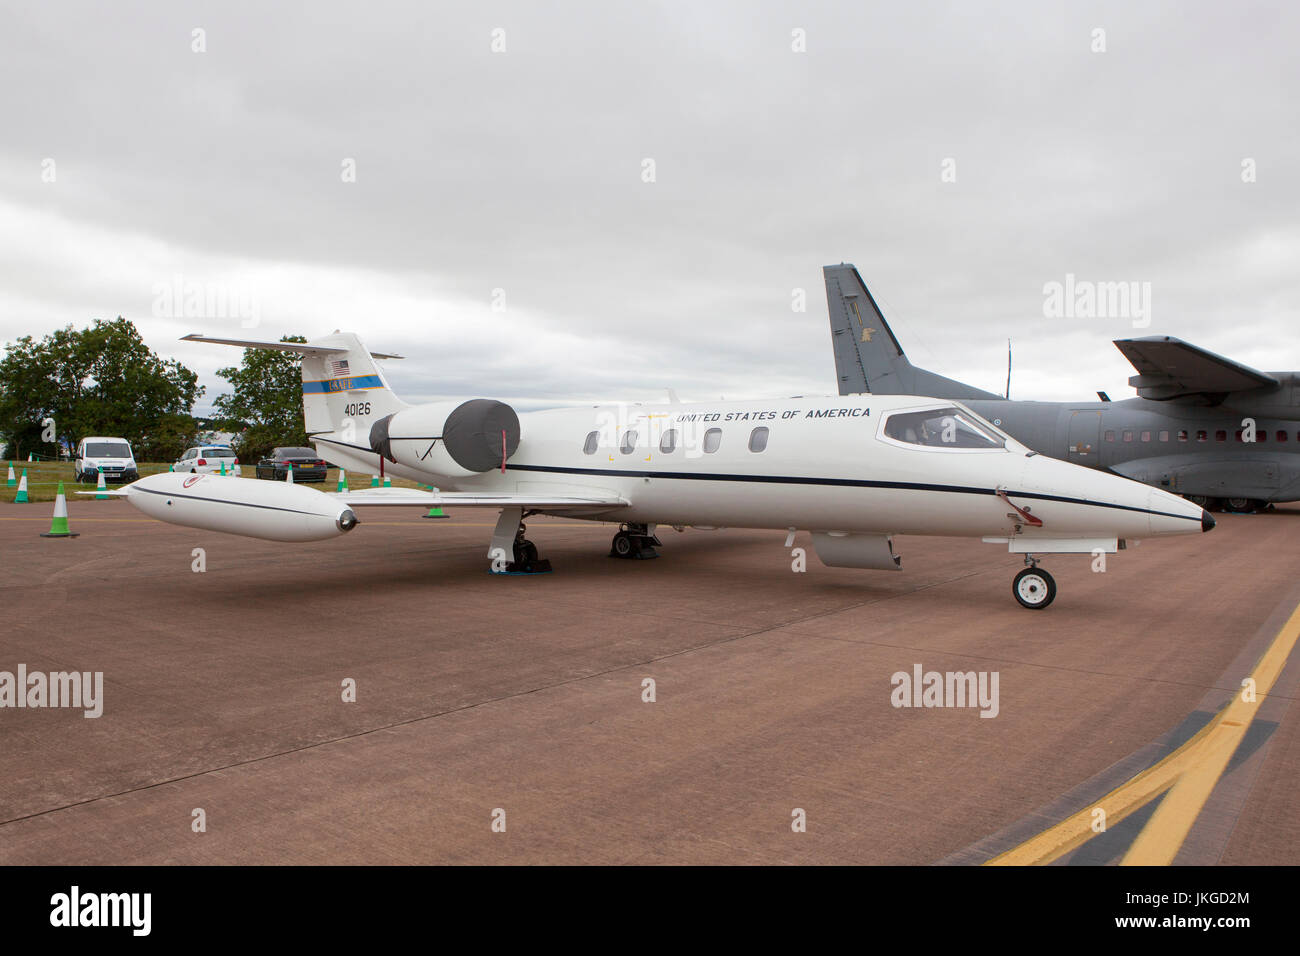 Learjet 35 USAF, 40126 American multi role business jets and military transport aircraft at the Royal International Air Tattoo 2017 Stock Photo